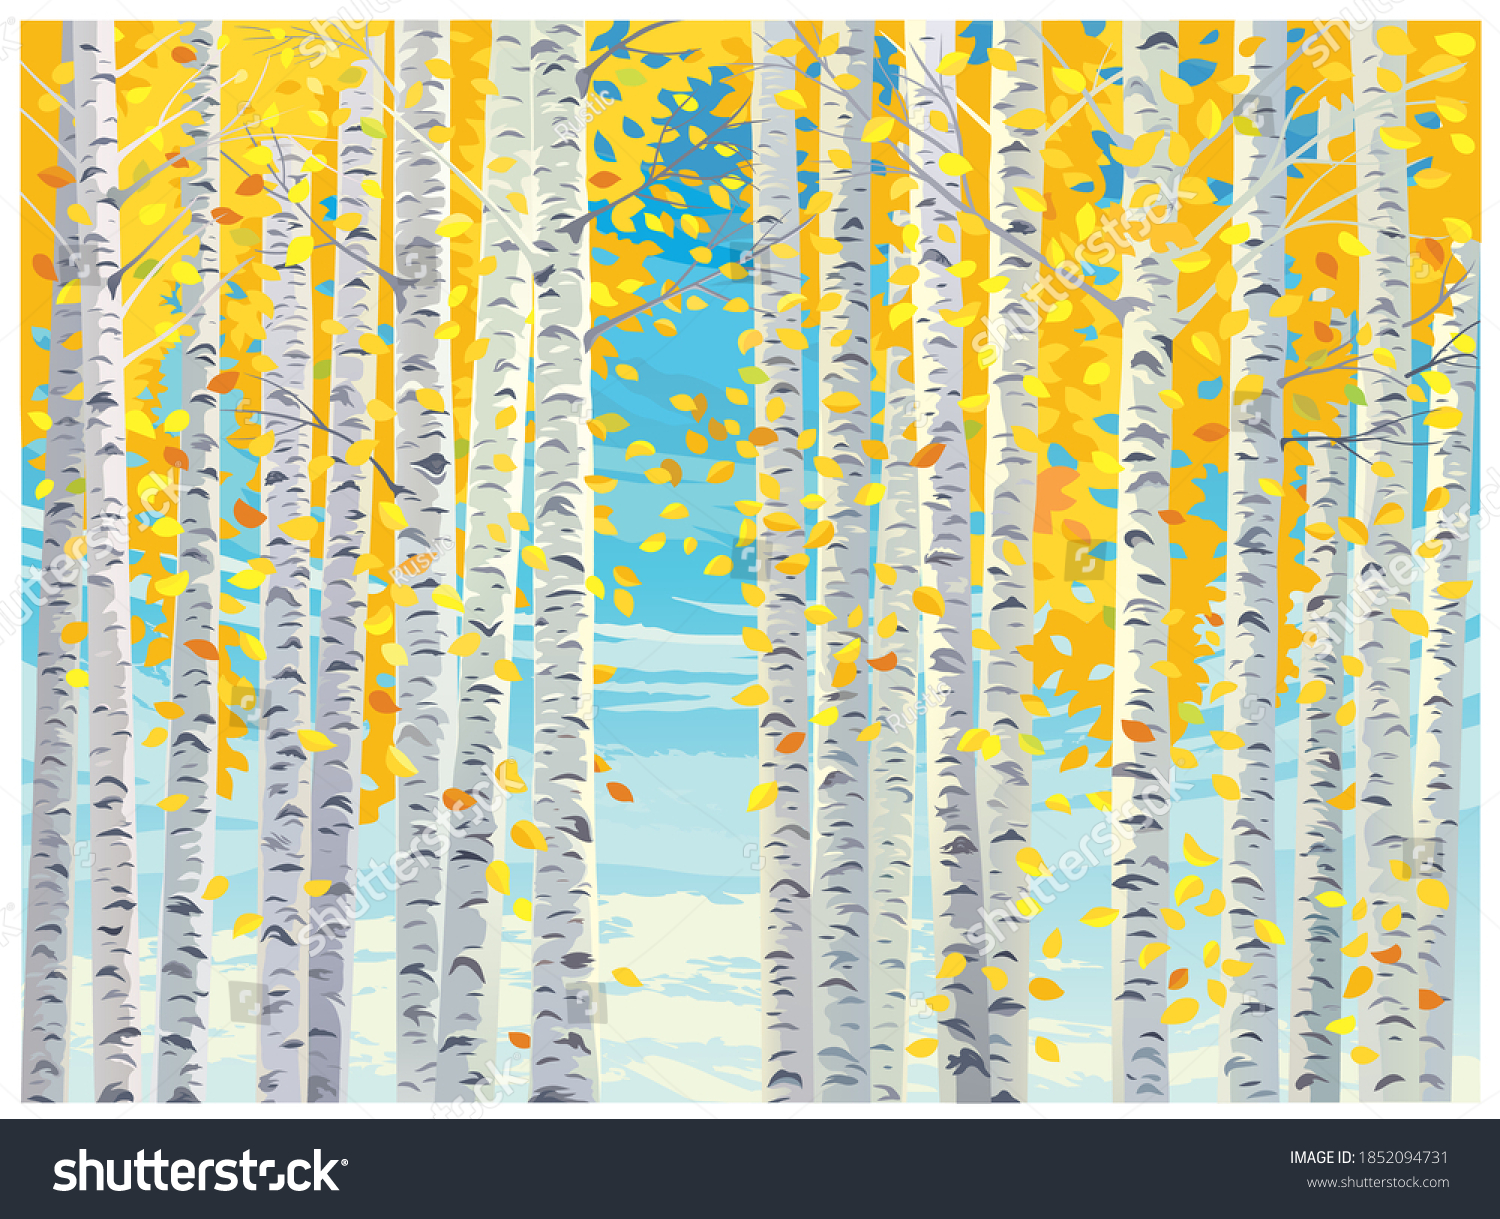 SVG of Autumn landscape, with birch trees and yellow autumn leaves falling to the ground. svg